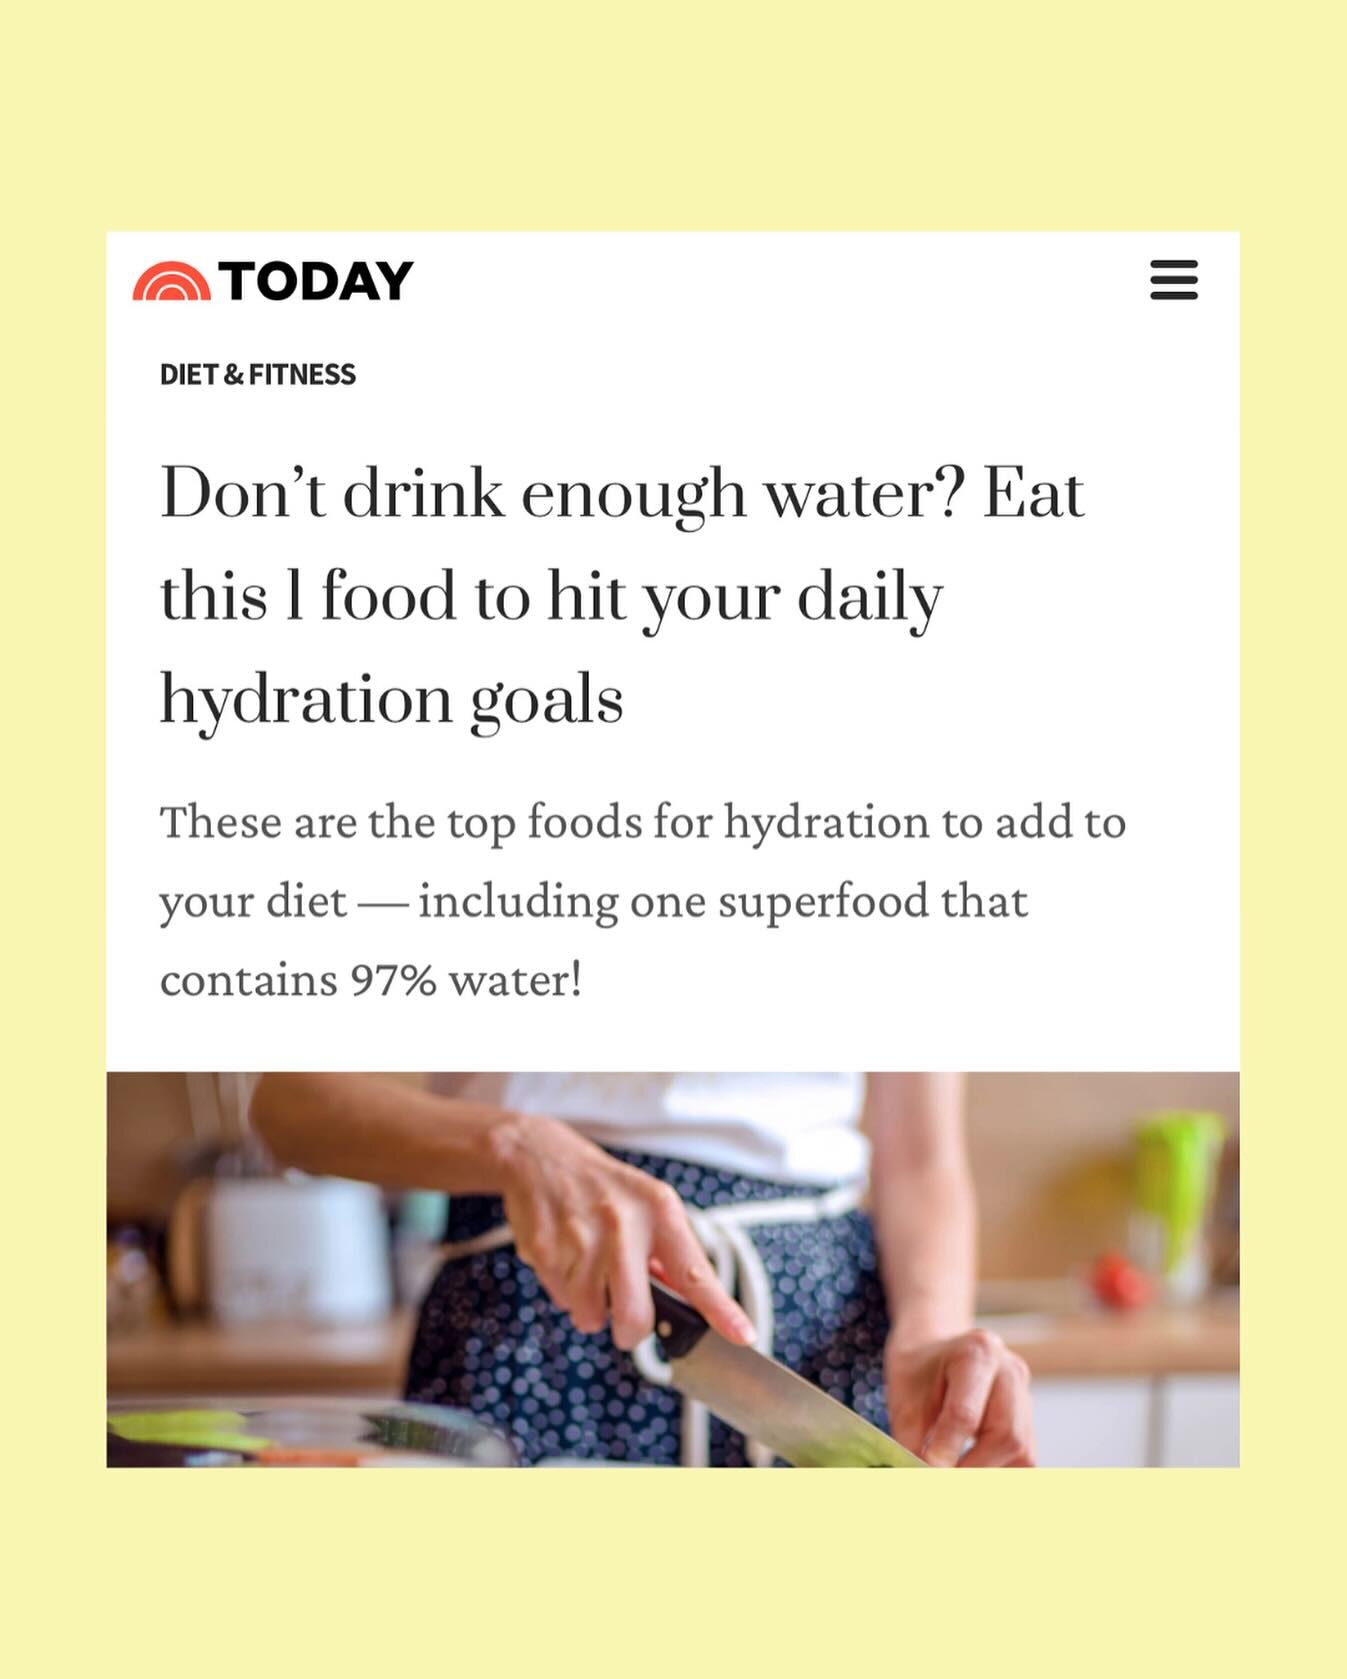 Certain foods are super-hydrating! What are those foods??
Comment WATER below or click on the link in my bio @realfoodreallife_rd 

And thank you to @greenletes and @todayshow for interviewing me! 

#hydrationiskey #eatyourwater #superfoods #dehydrat